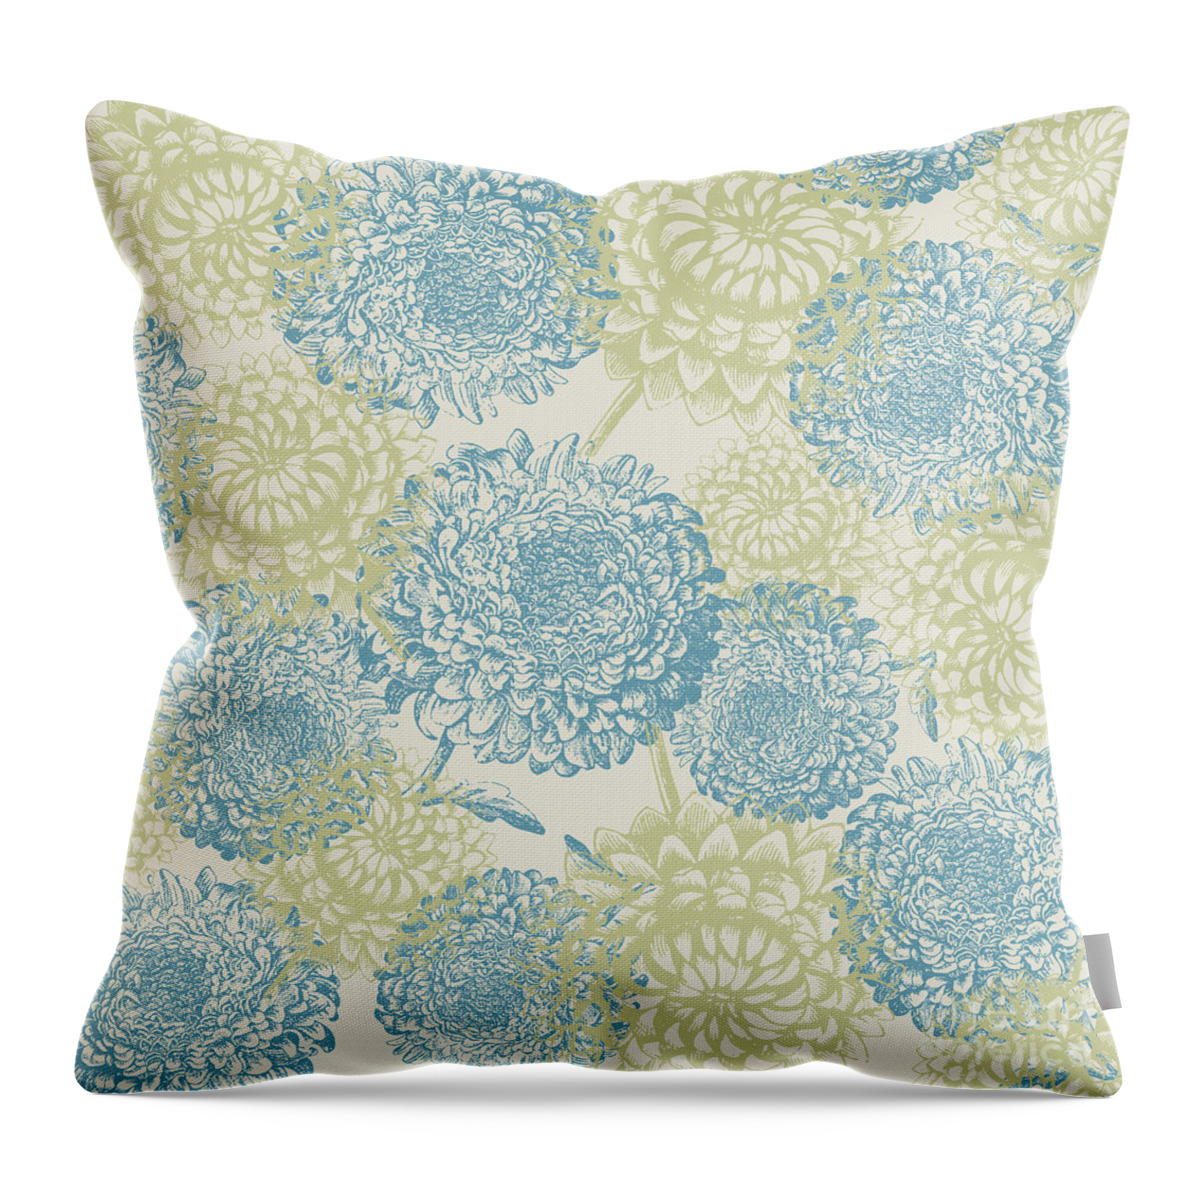 Graphic-design Throw Pillow featuring the digital art Blue And Green Flowers by Sylvia Cook